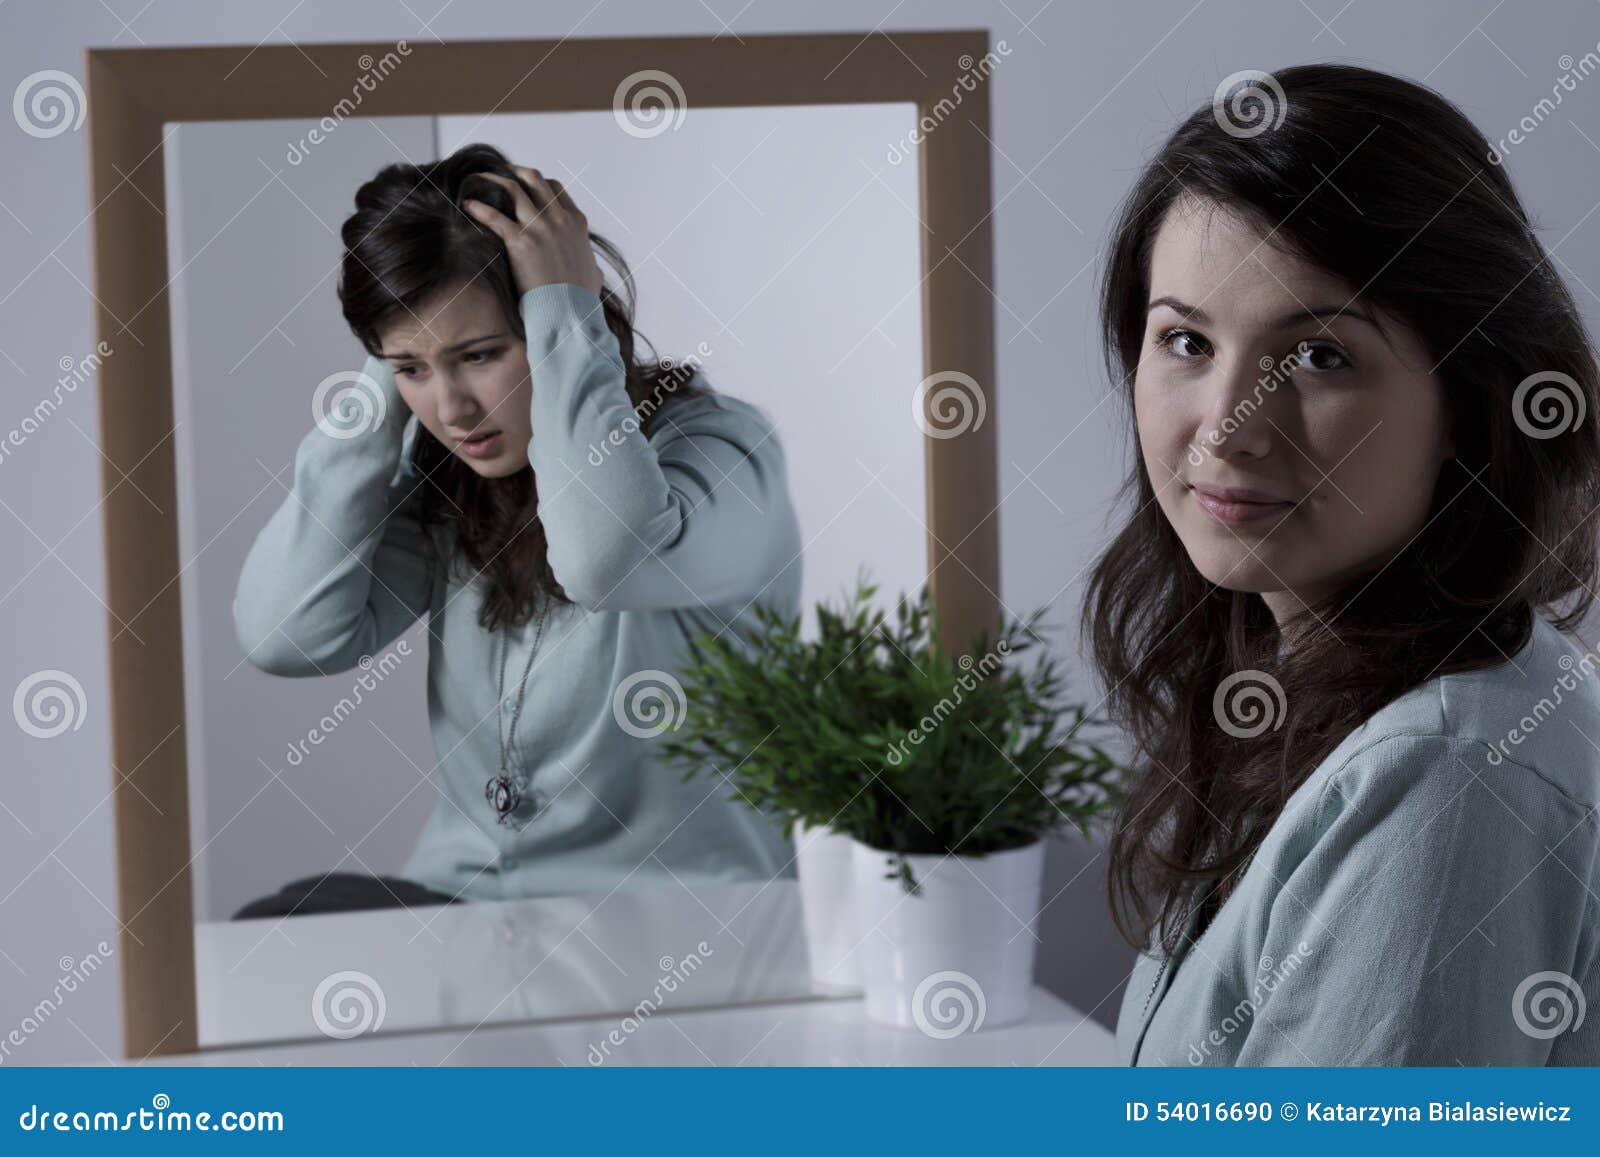 woman with depression